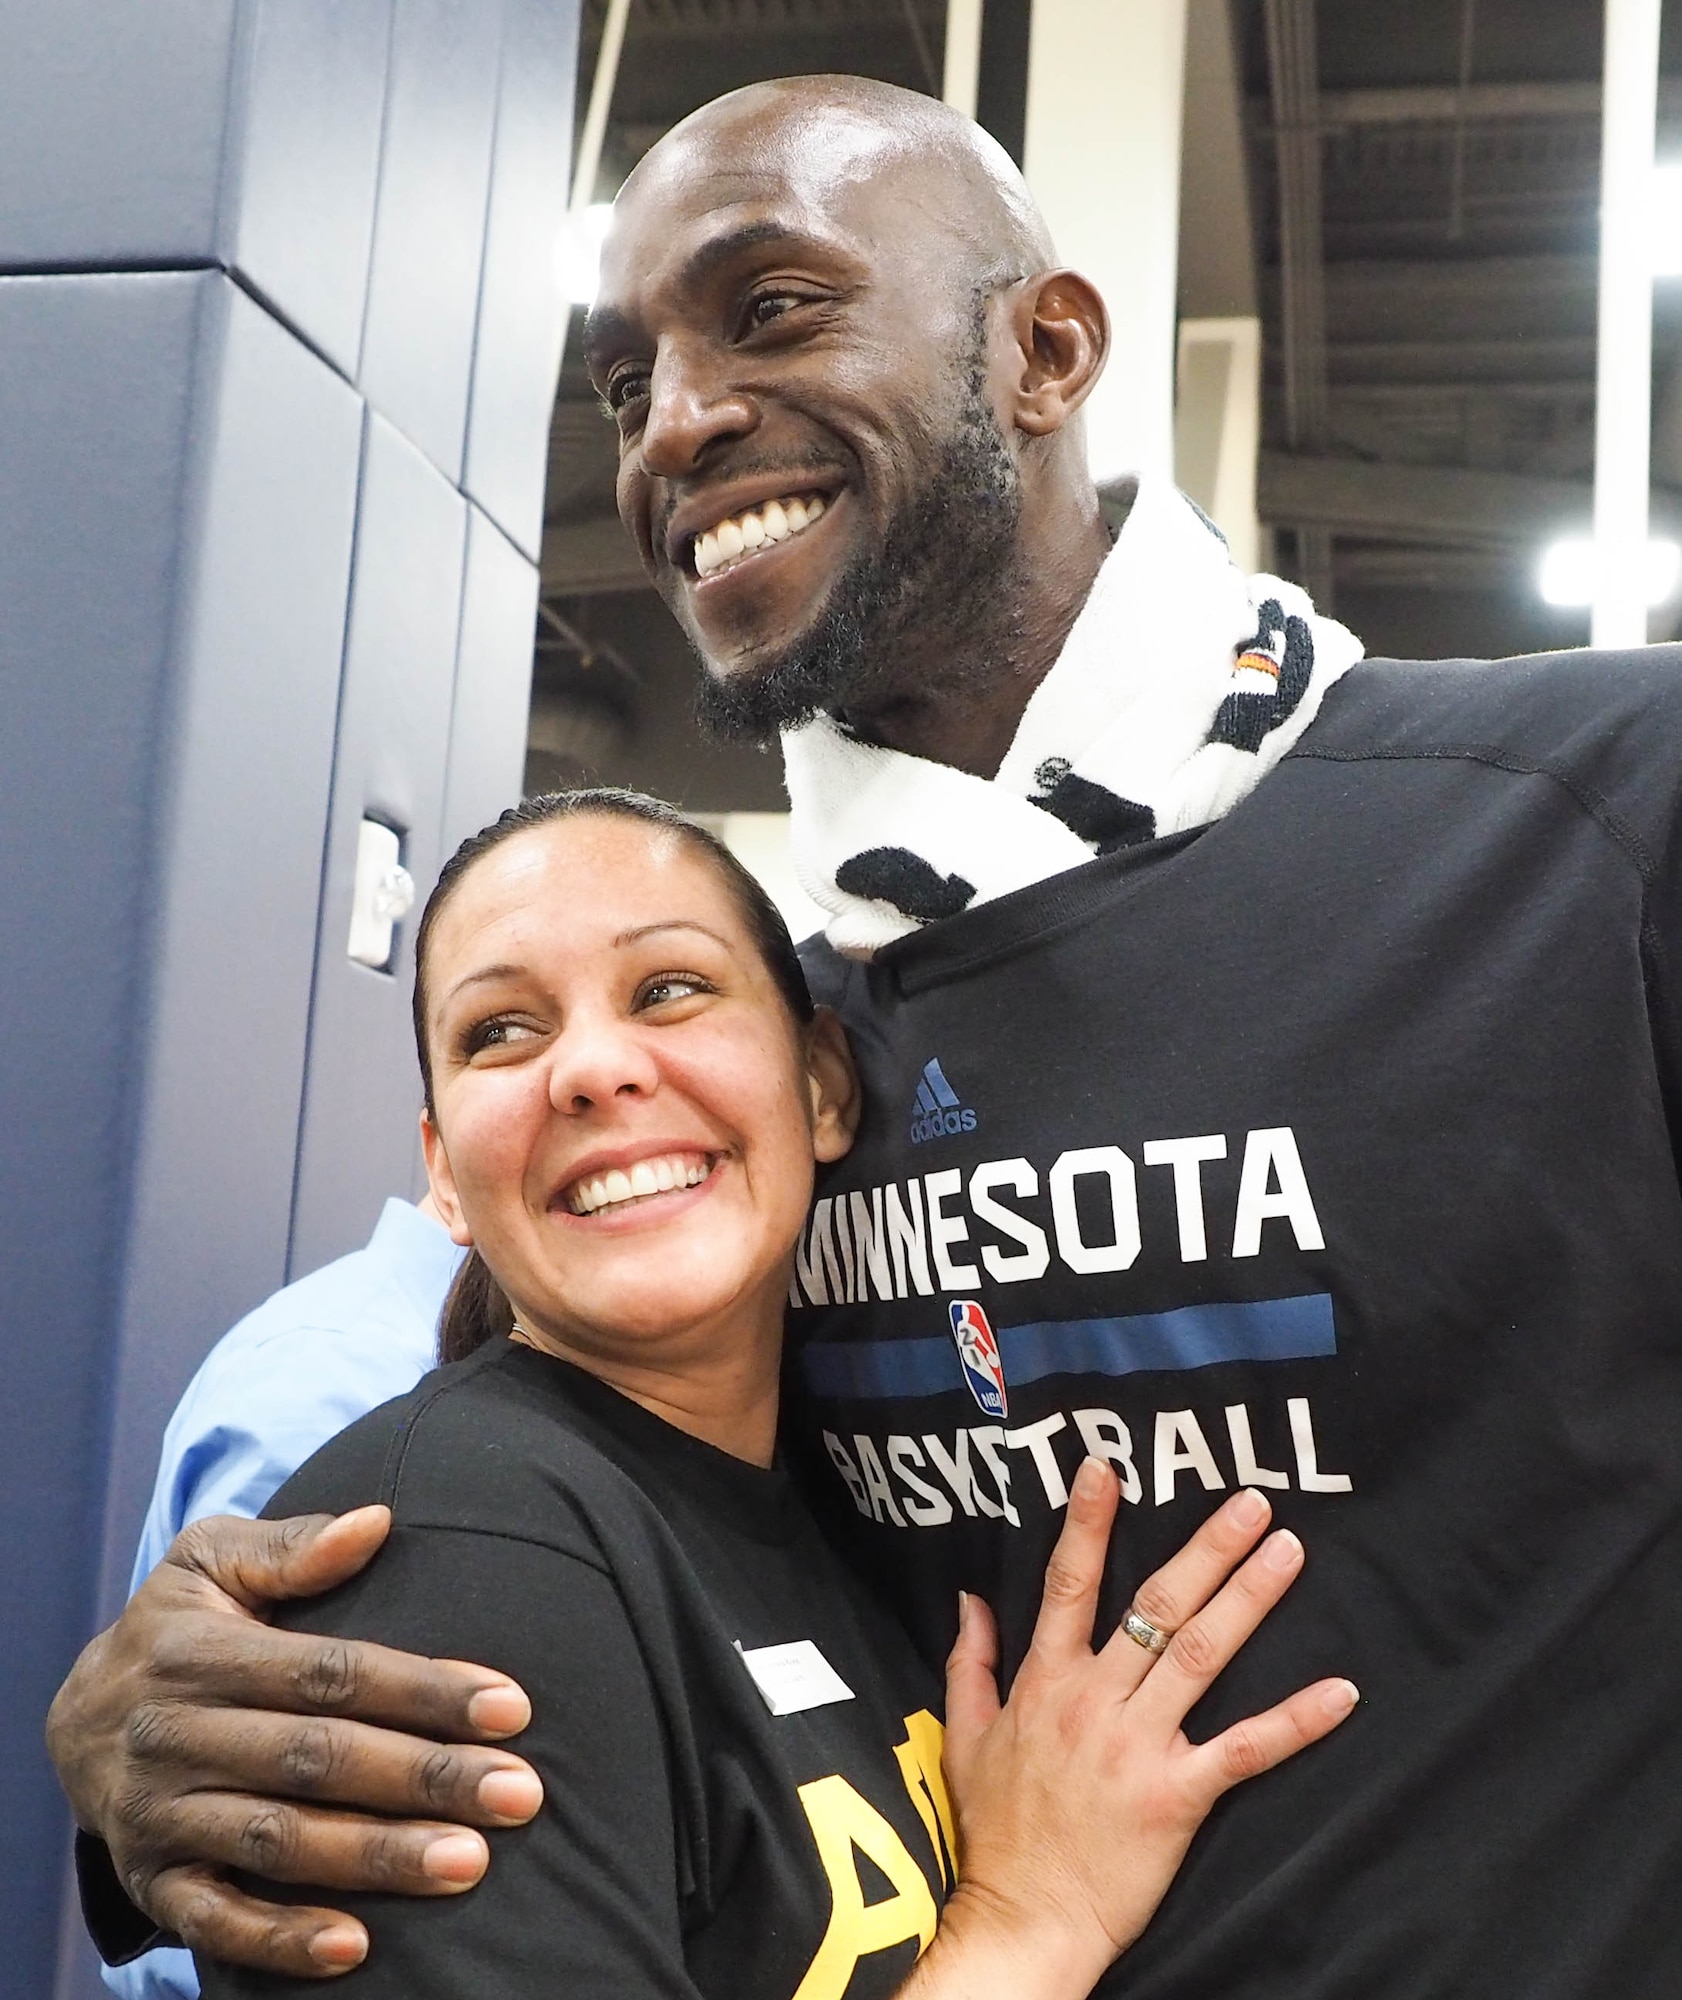 Timberwolves Power Forward/Center Kevin Garnett visits with military members during the open practice. (Air Force Photo/Paul Zadach)